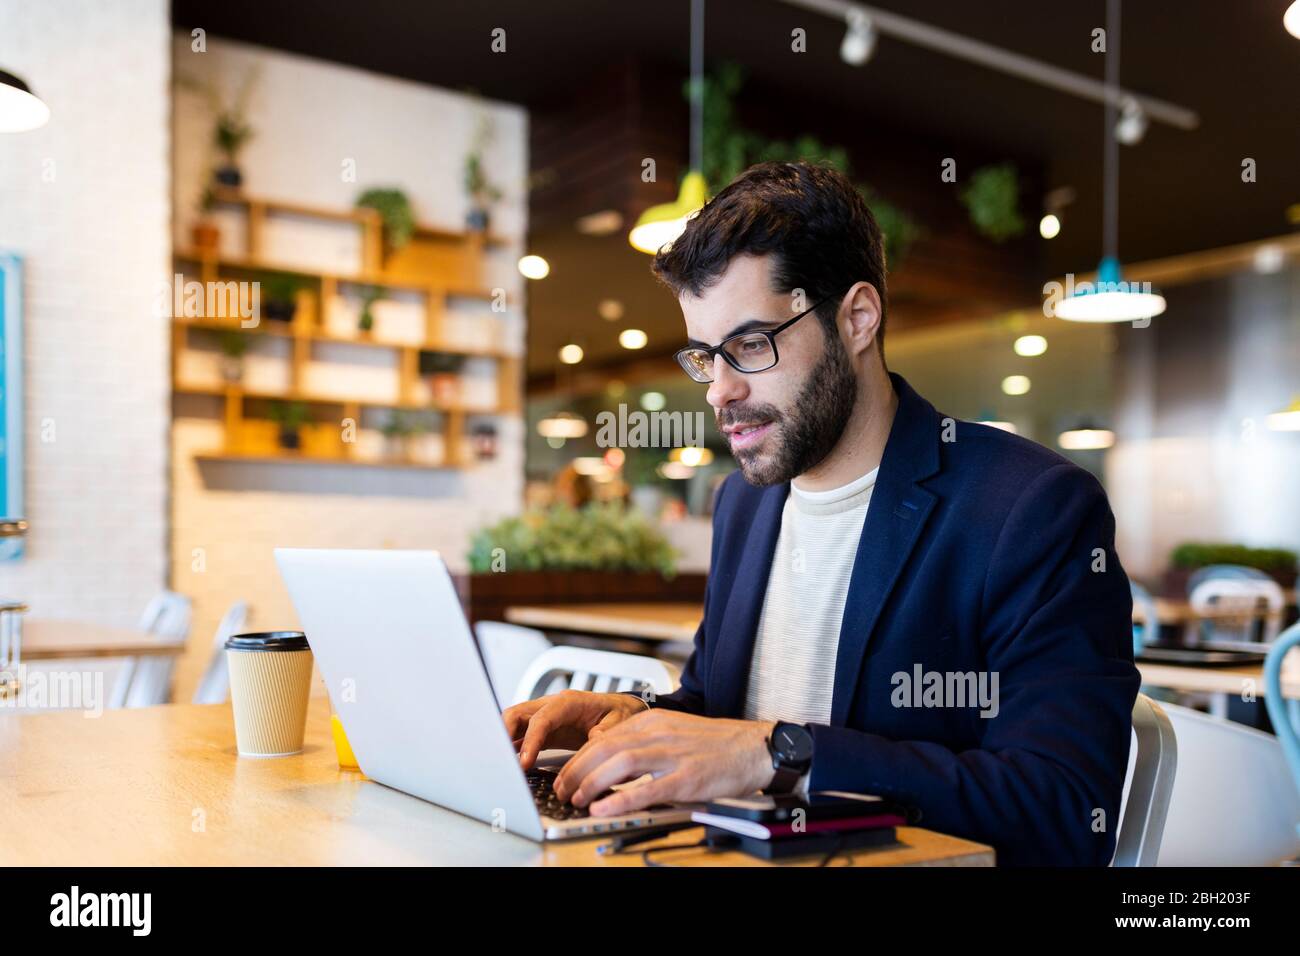 Portrait of businessman working on laptop in a coffee shop Stock Photo